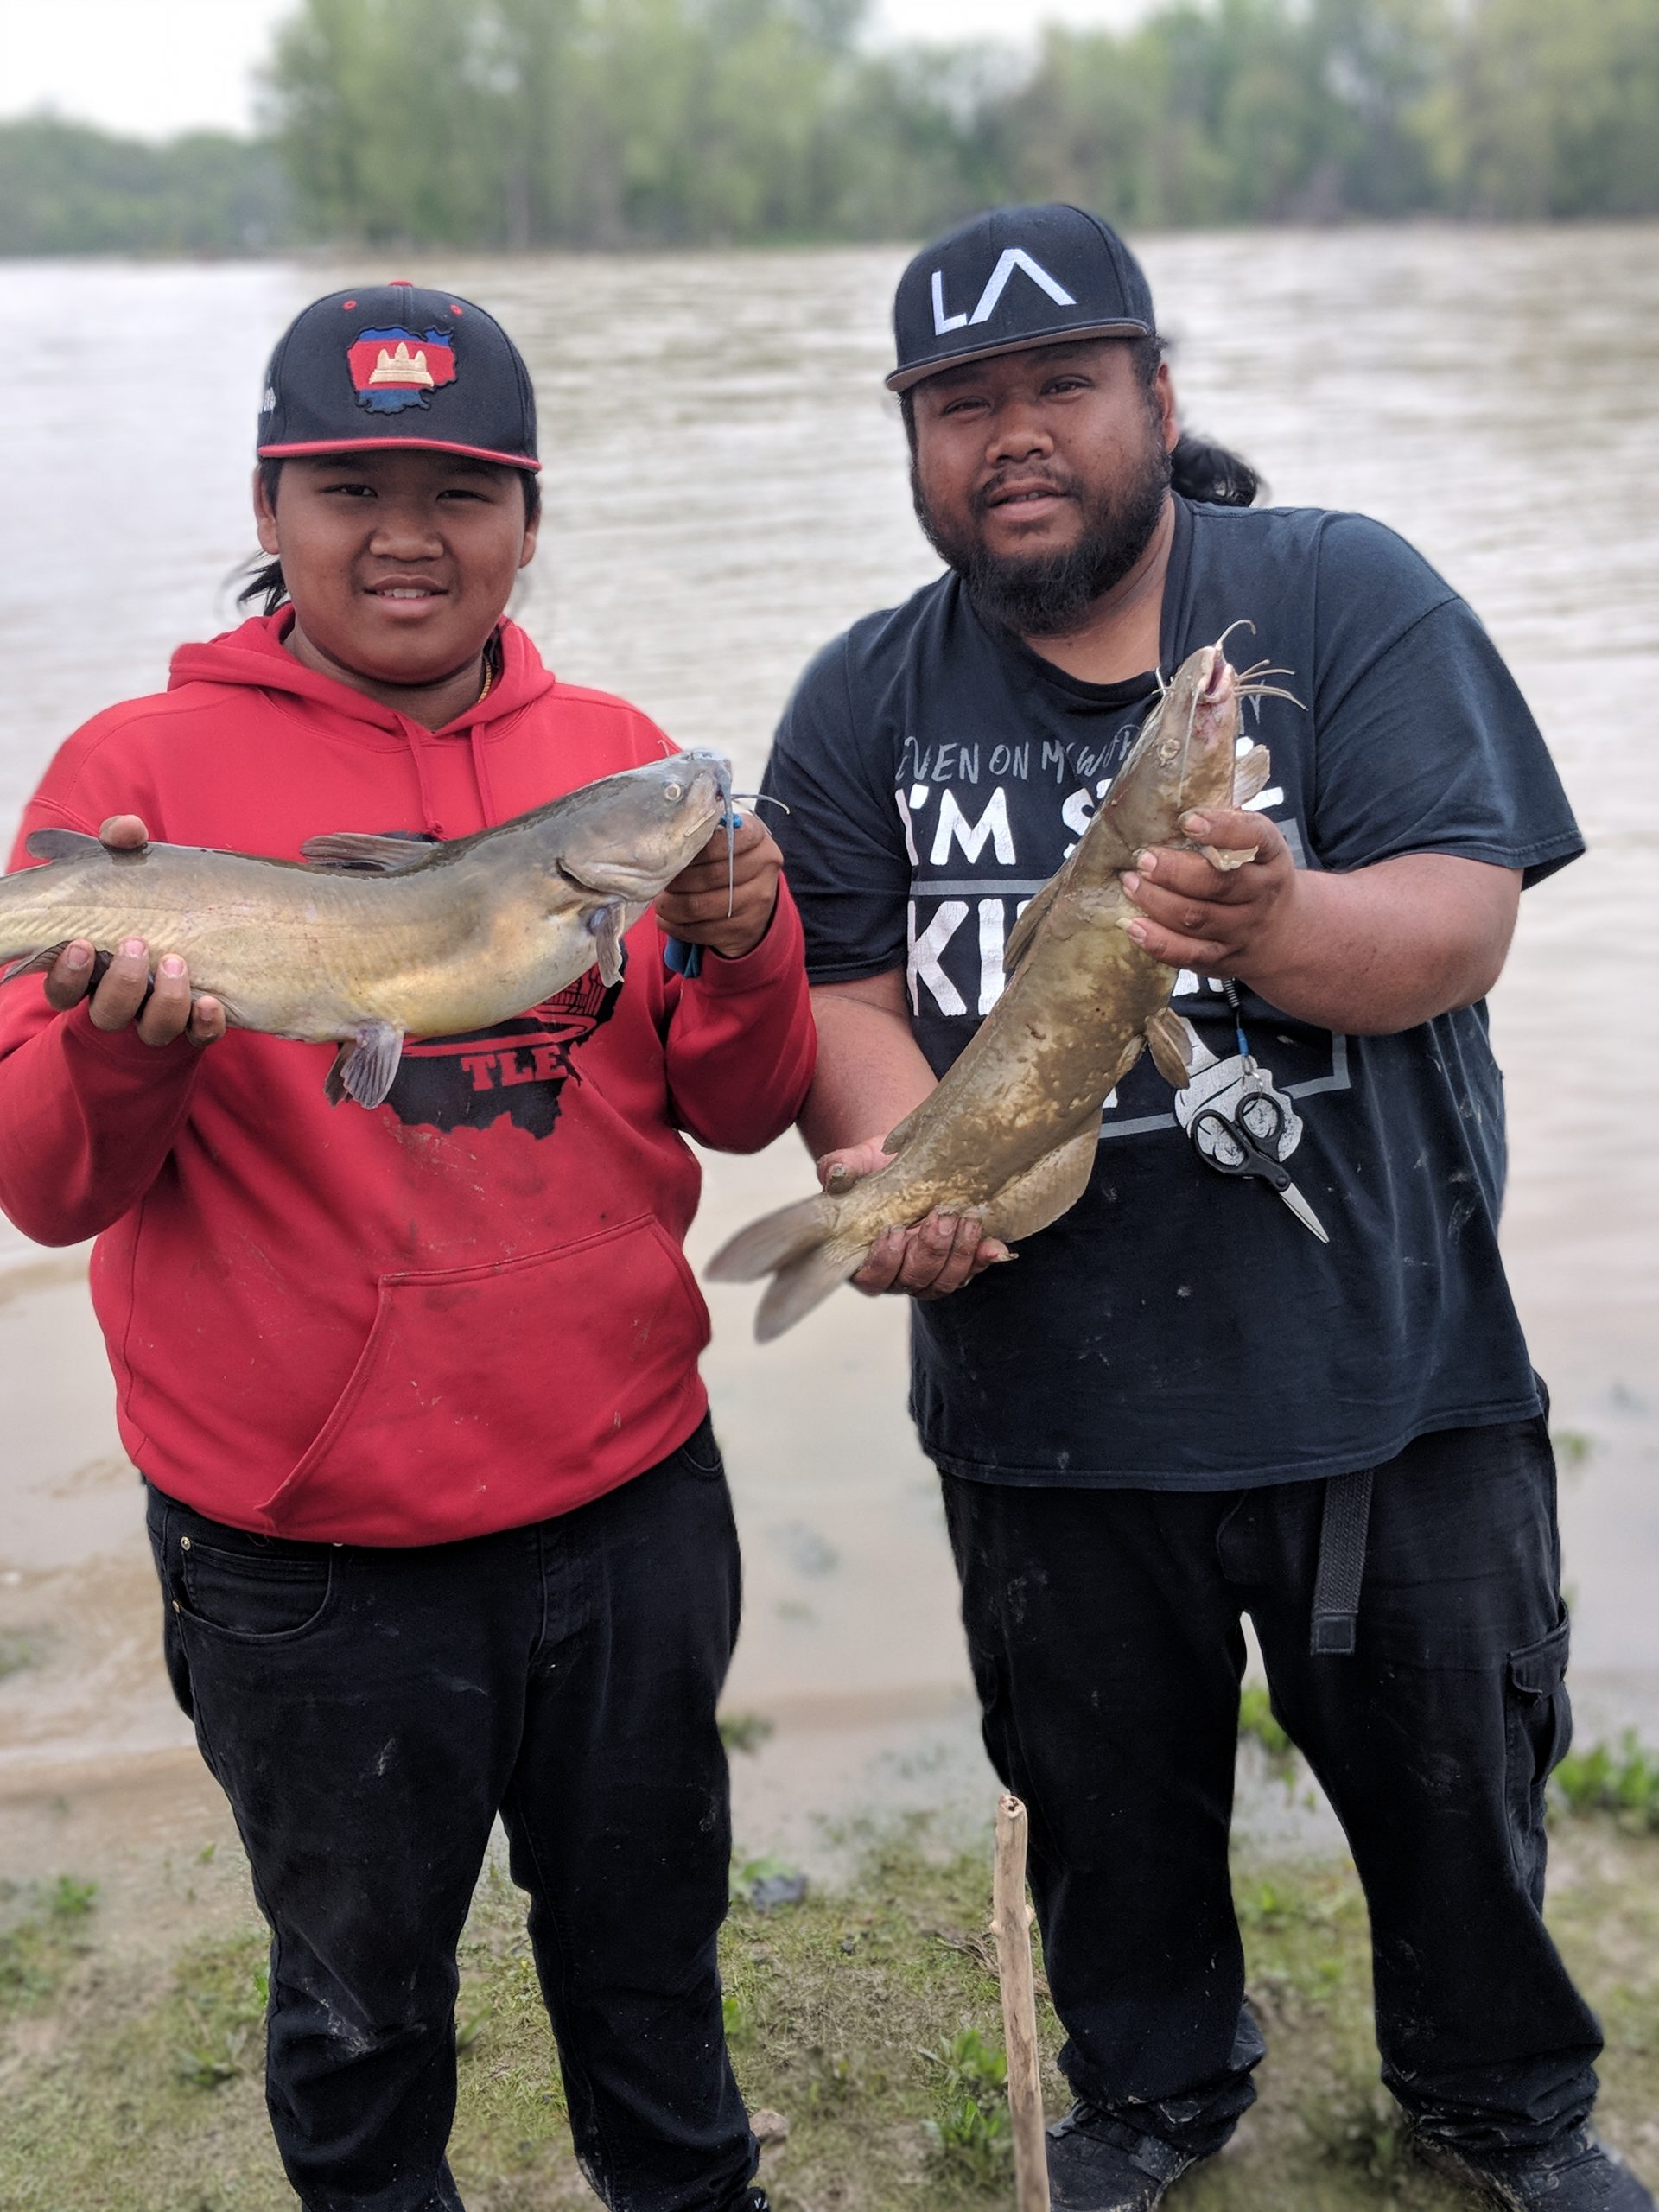 Maumee River report- 23 may 20